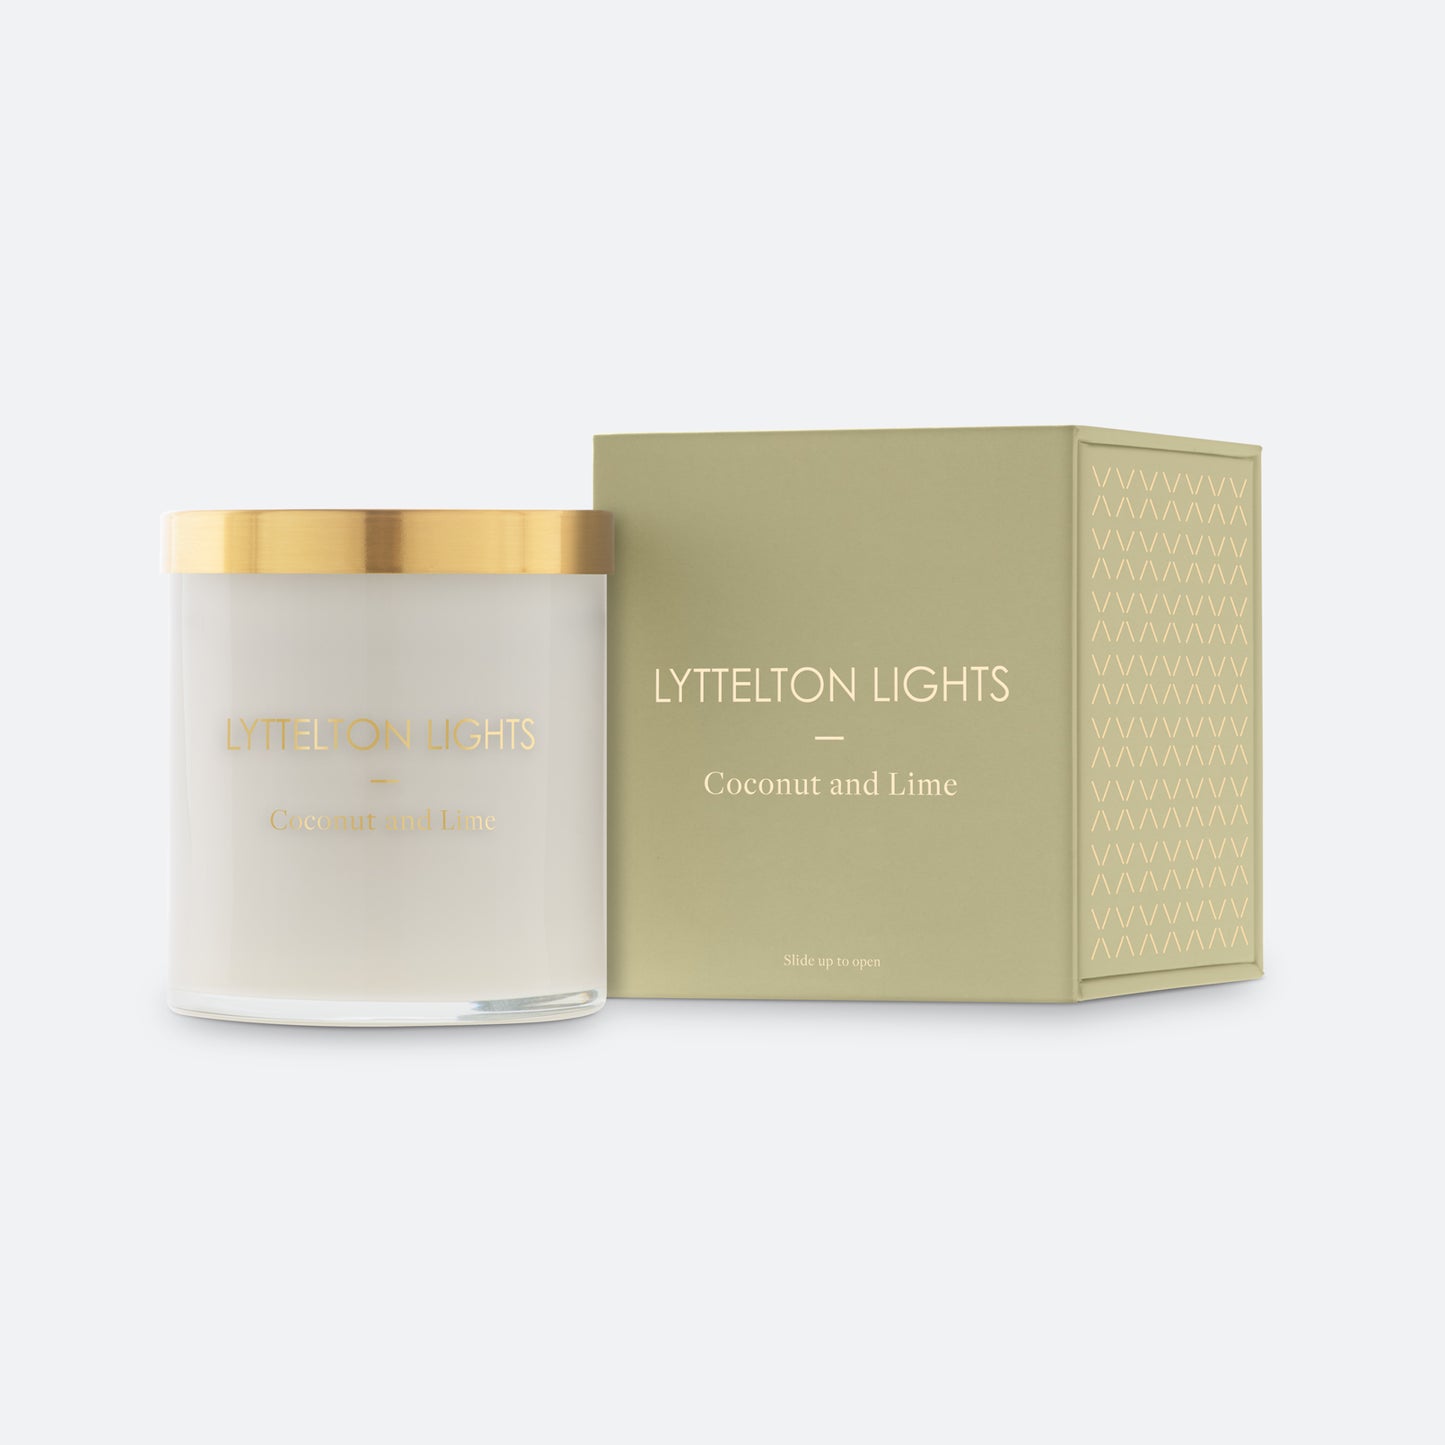 Coconut & Lime Candle by Lyttelton lights